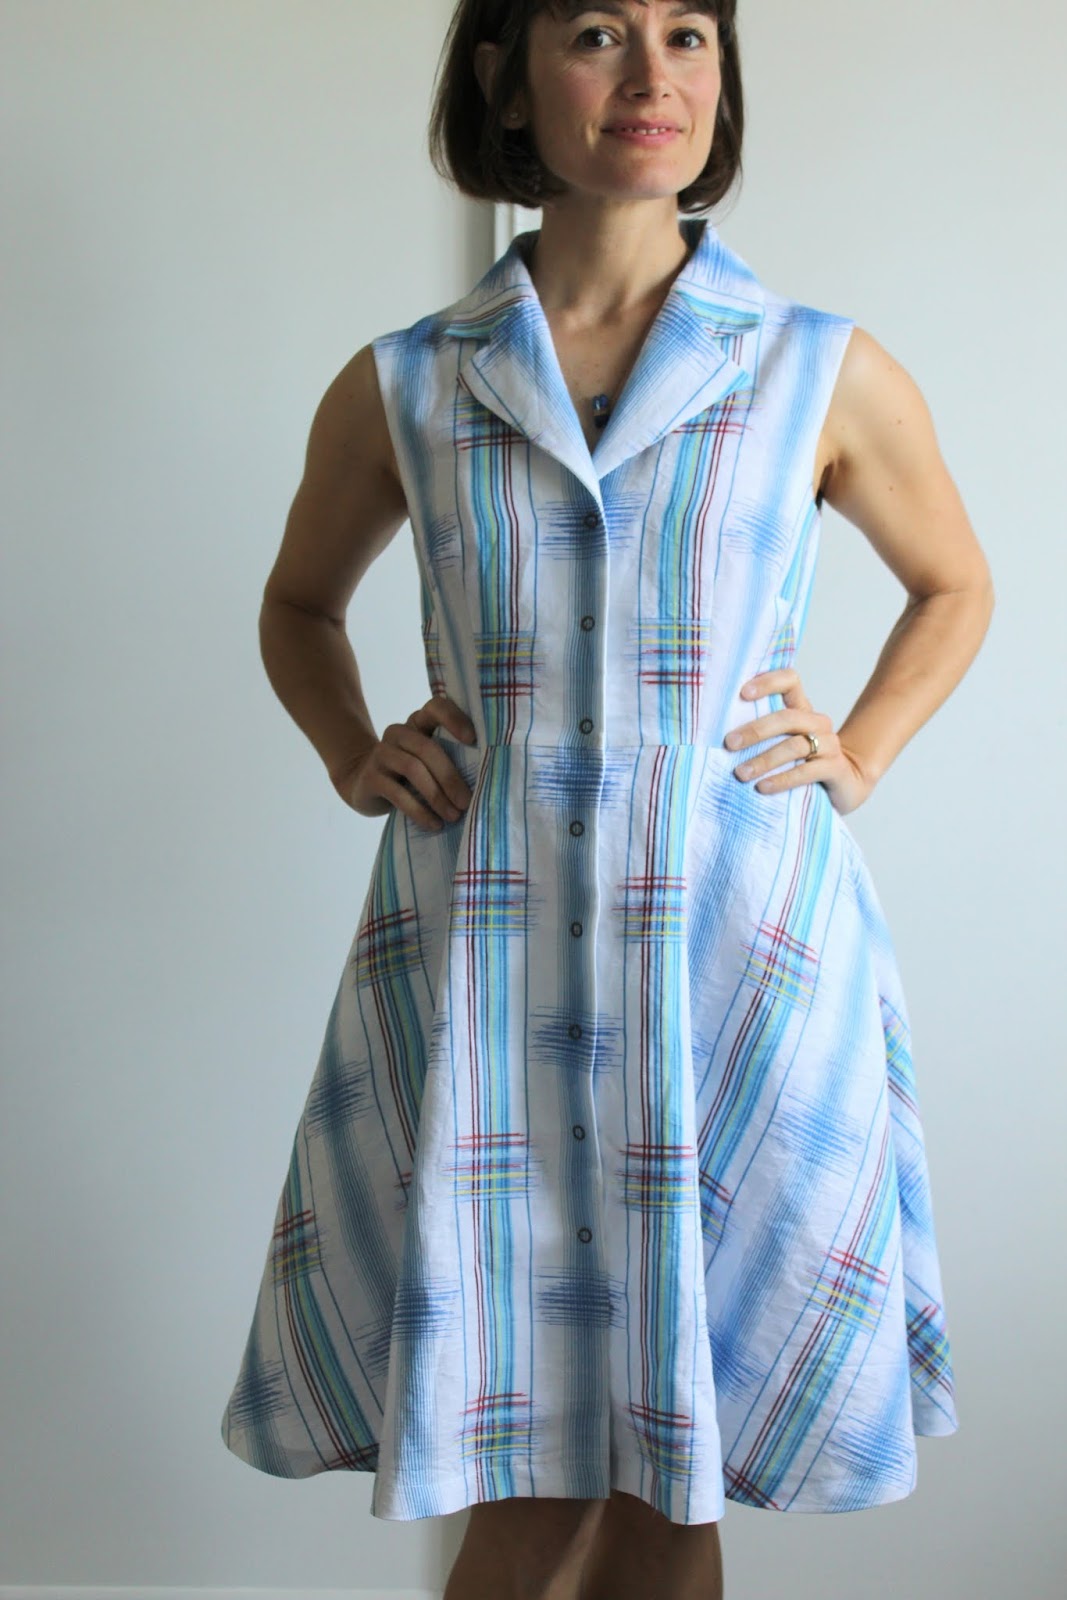 Nicole at Home: Two summer shirtdresses: M6891